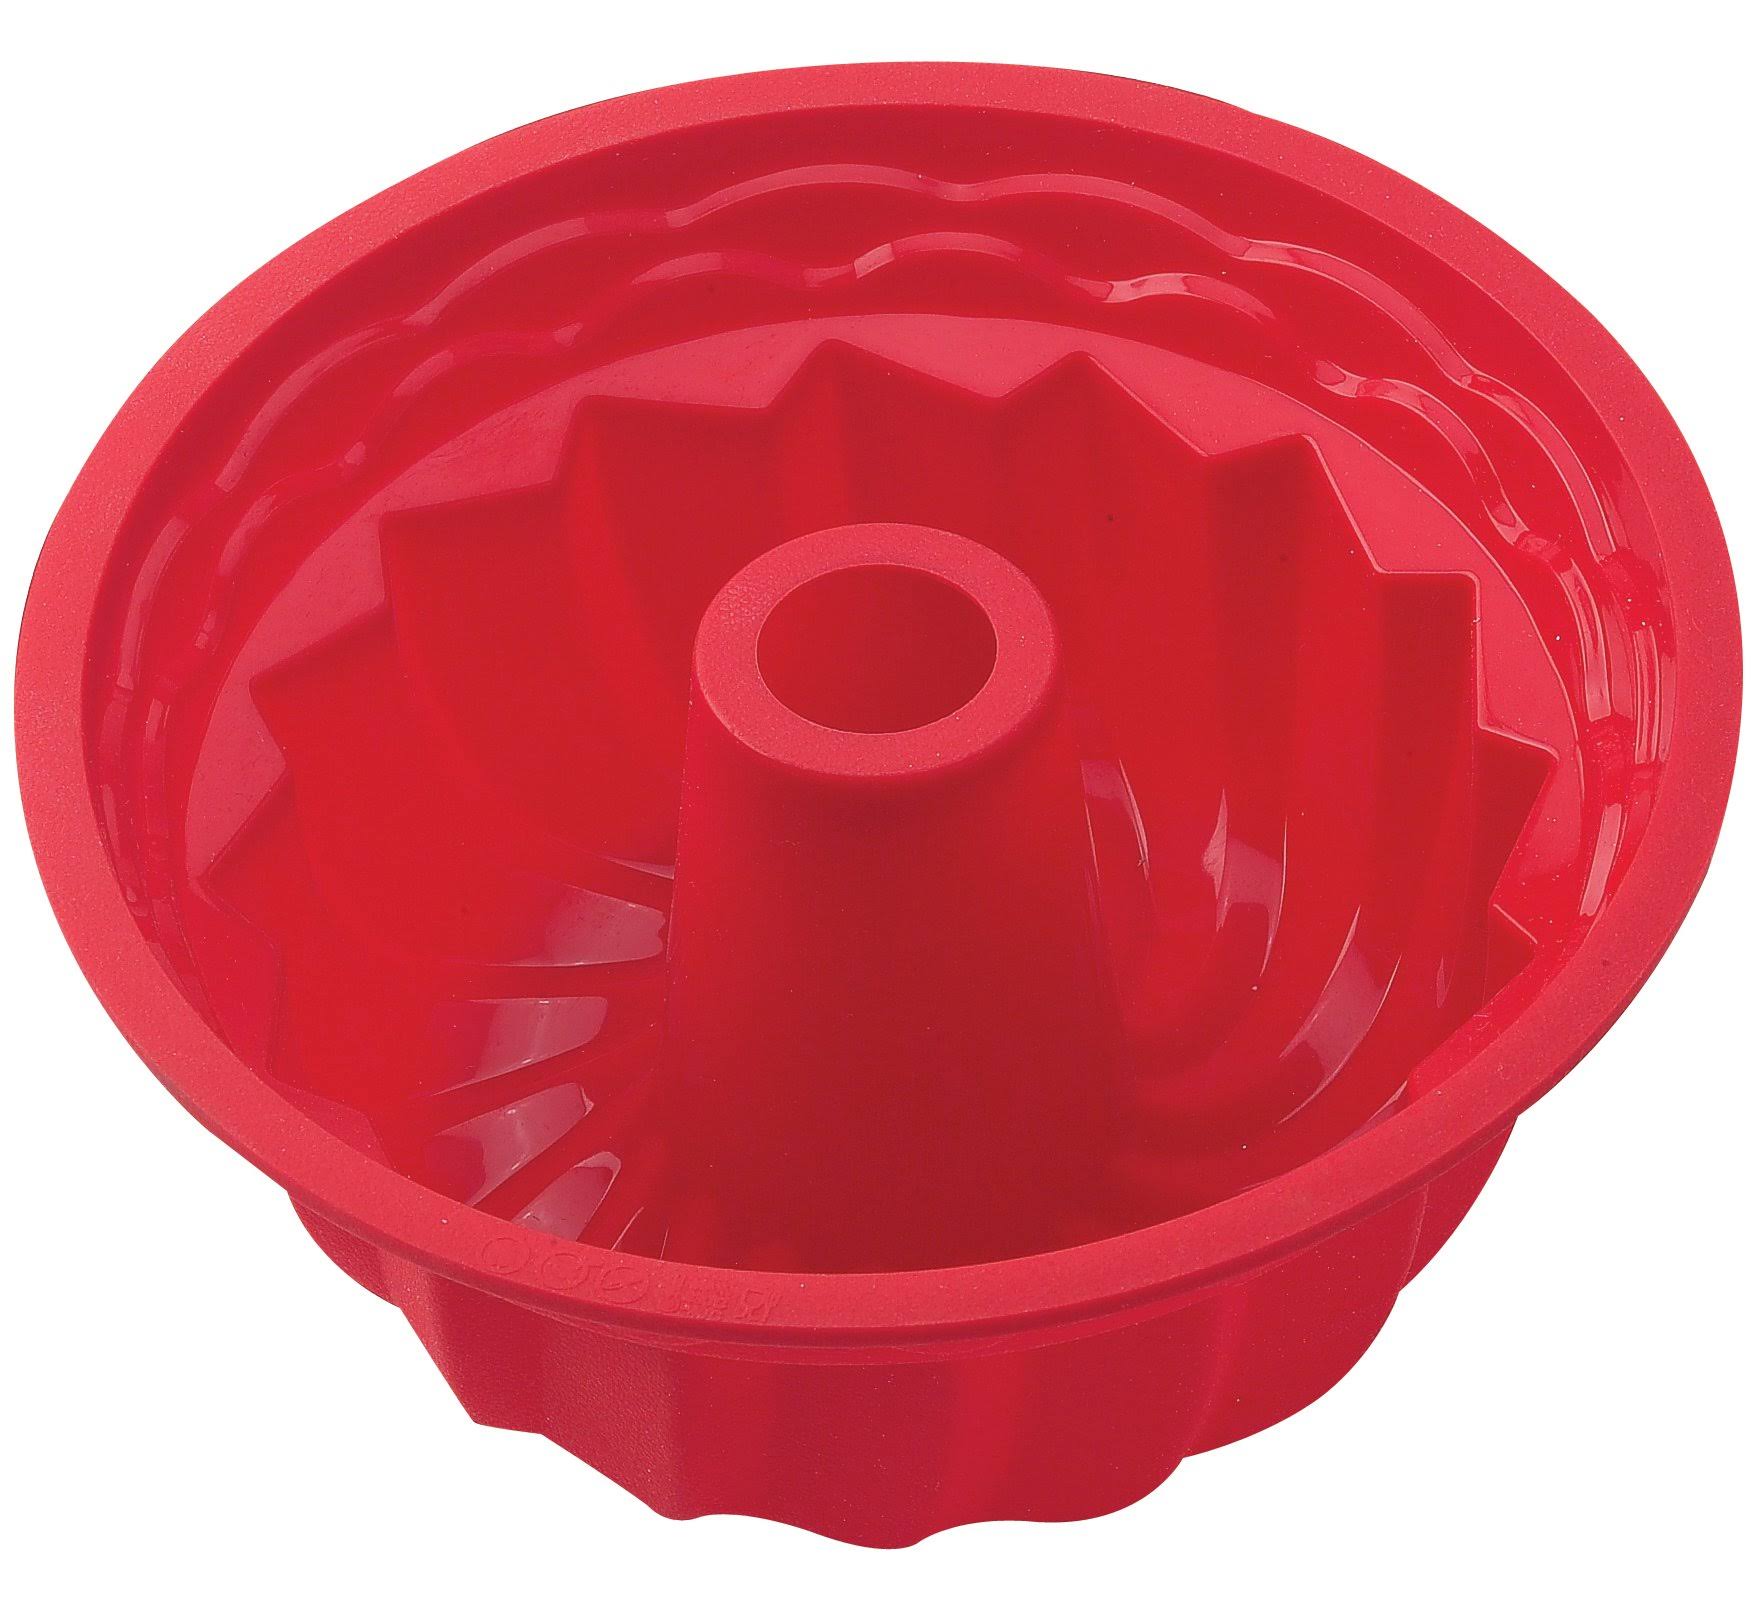 Mrs. Anderson's Baking Silicone Cake Pan - 9.5" x 4"